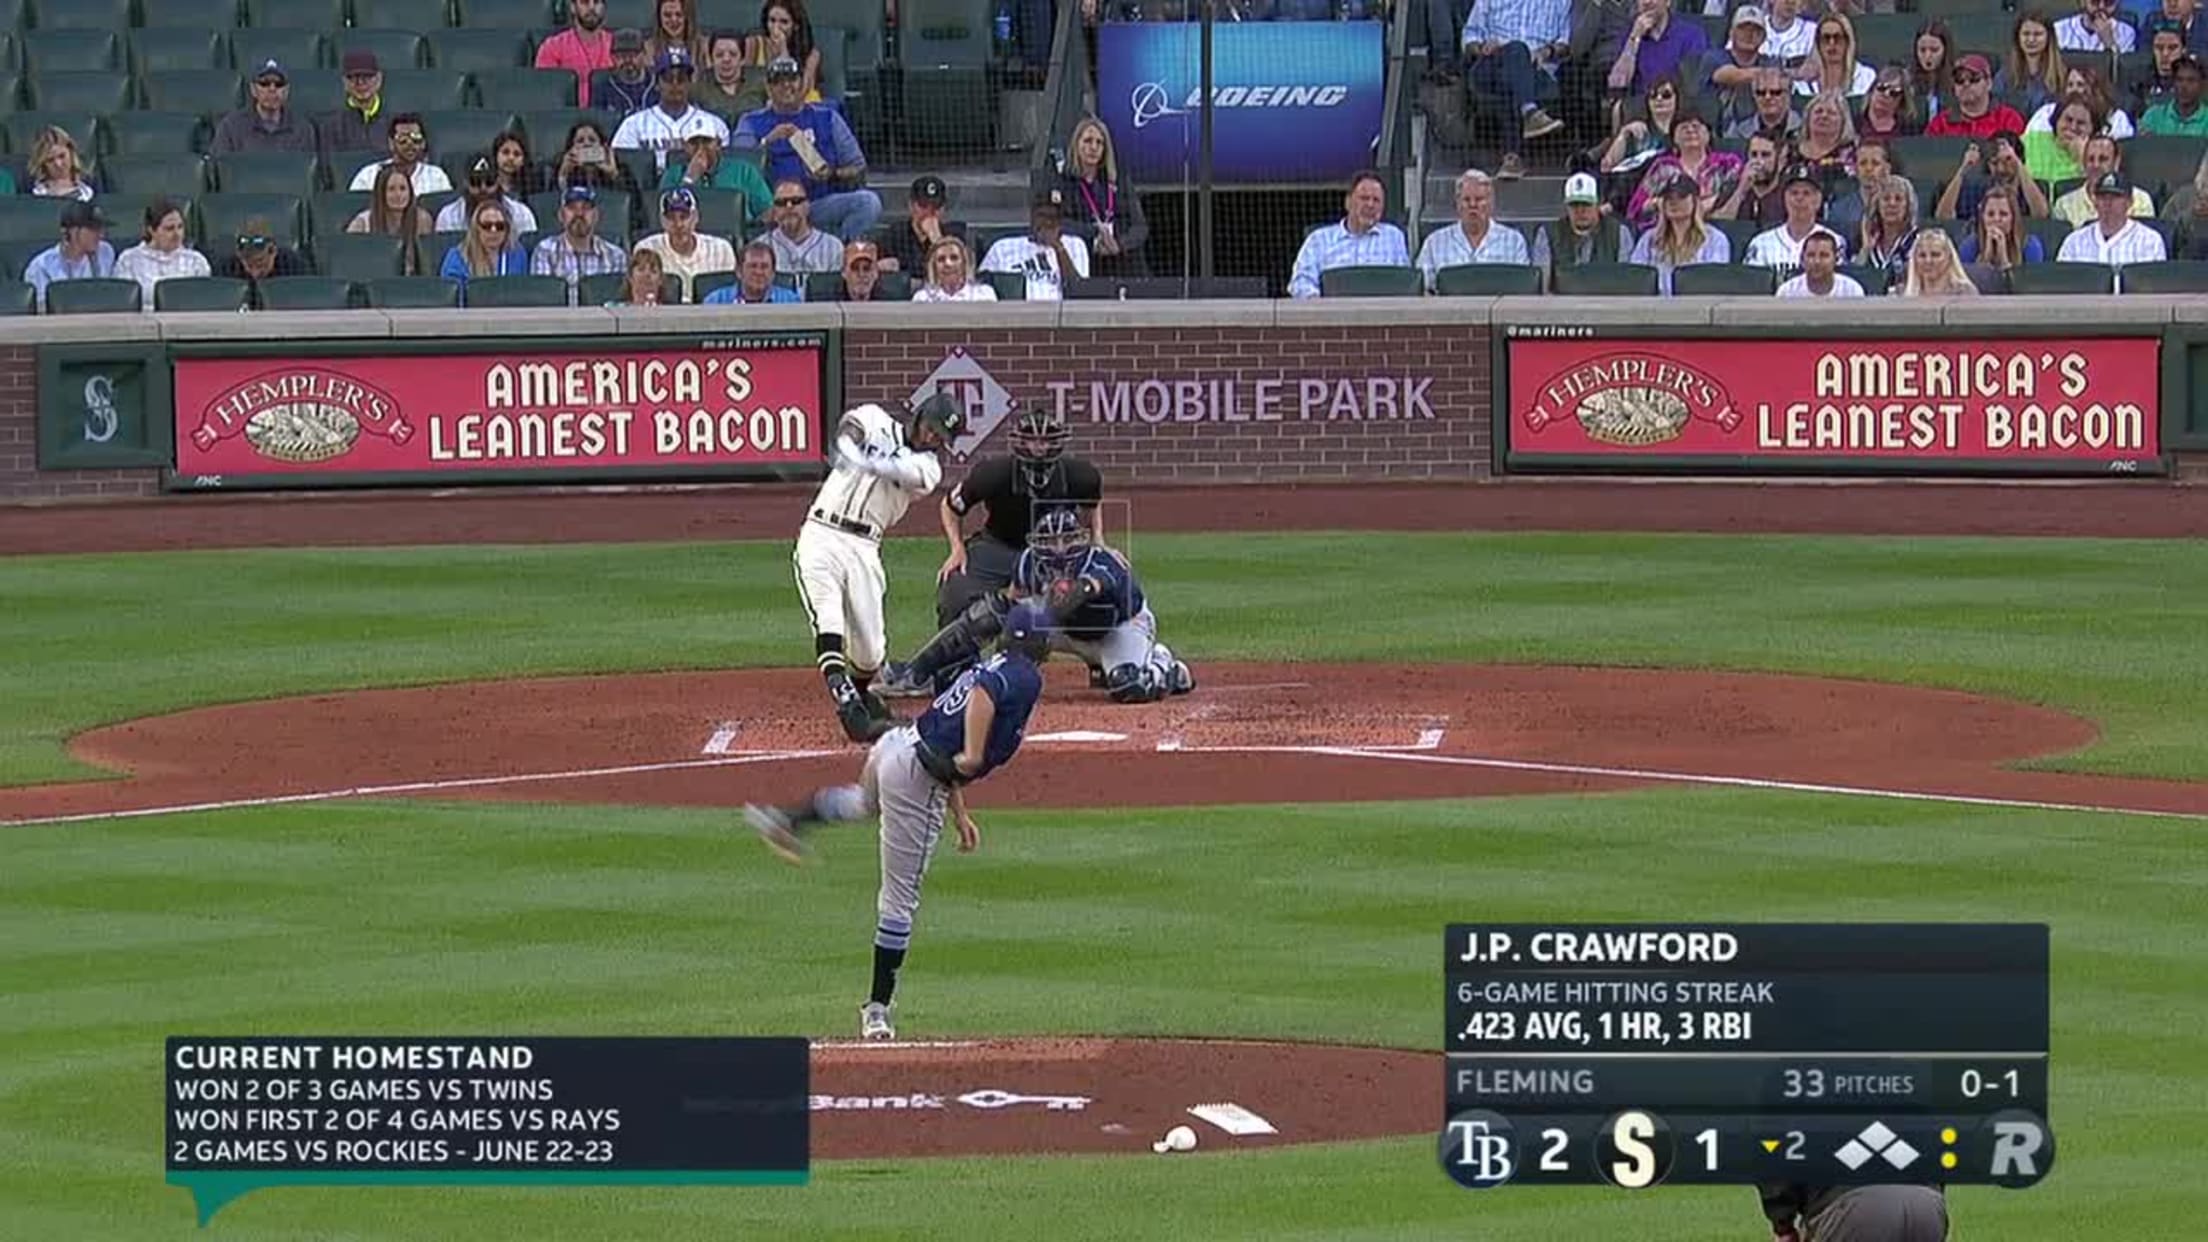 J.P. Crawford's Grand Slam Sends T-Mobile Park Into a Frenzy 